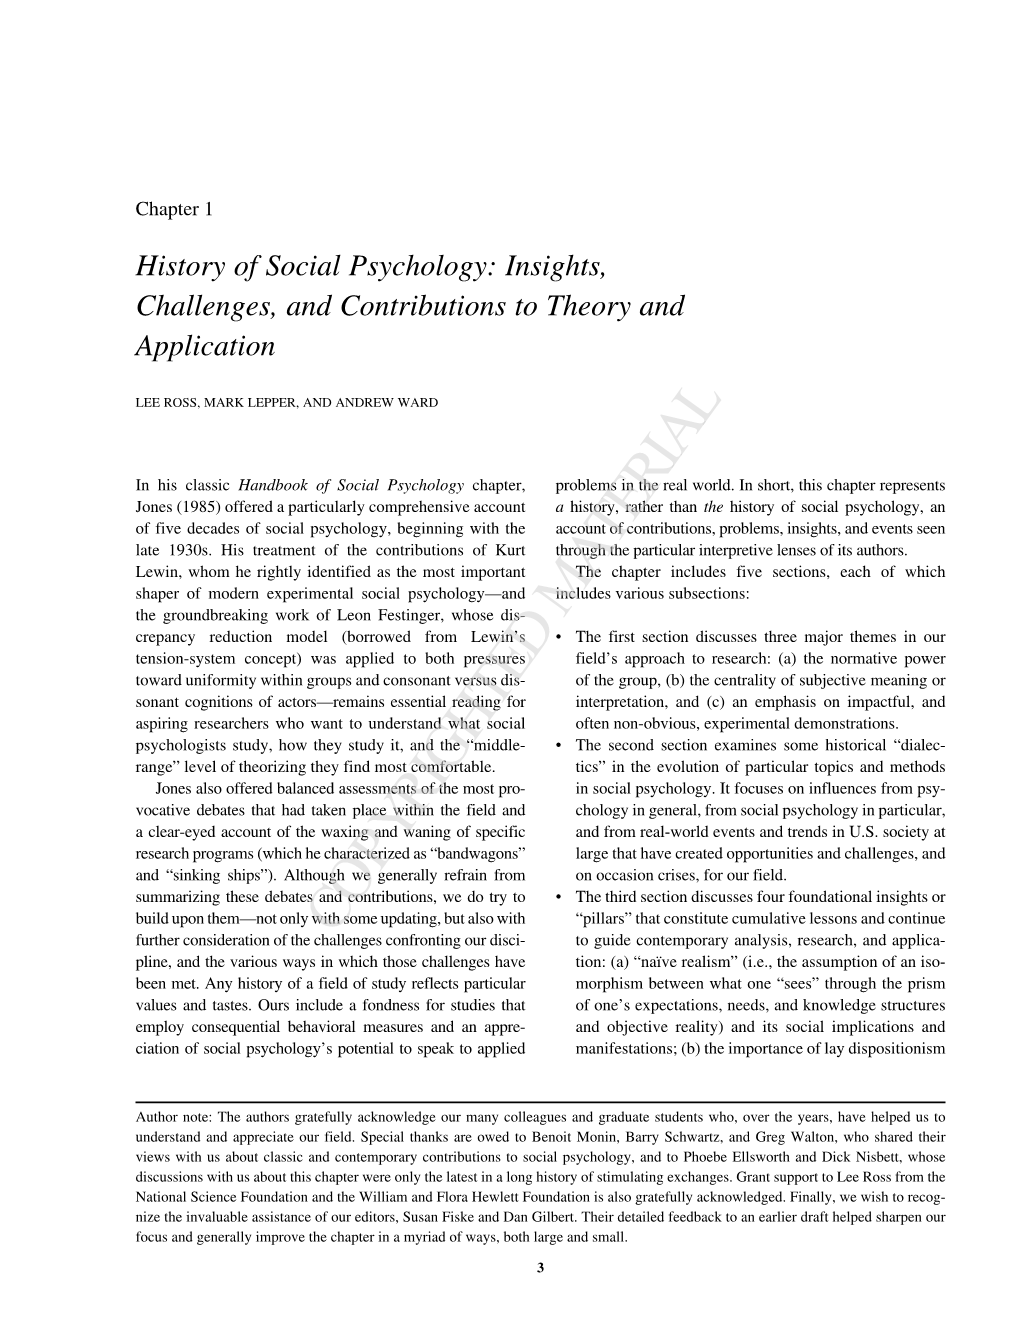 History of Social Psychology: Insights, Challenges, and Contributions to Theory and Application